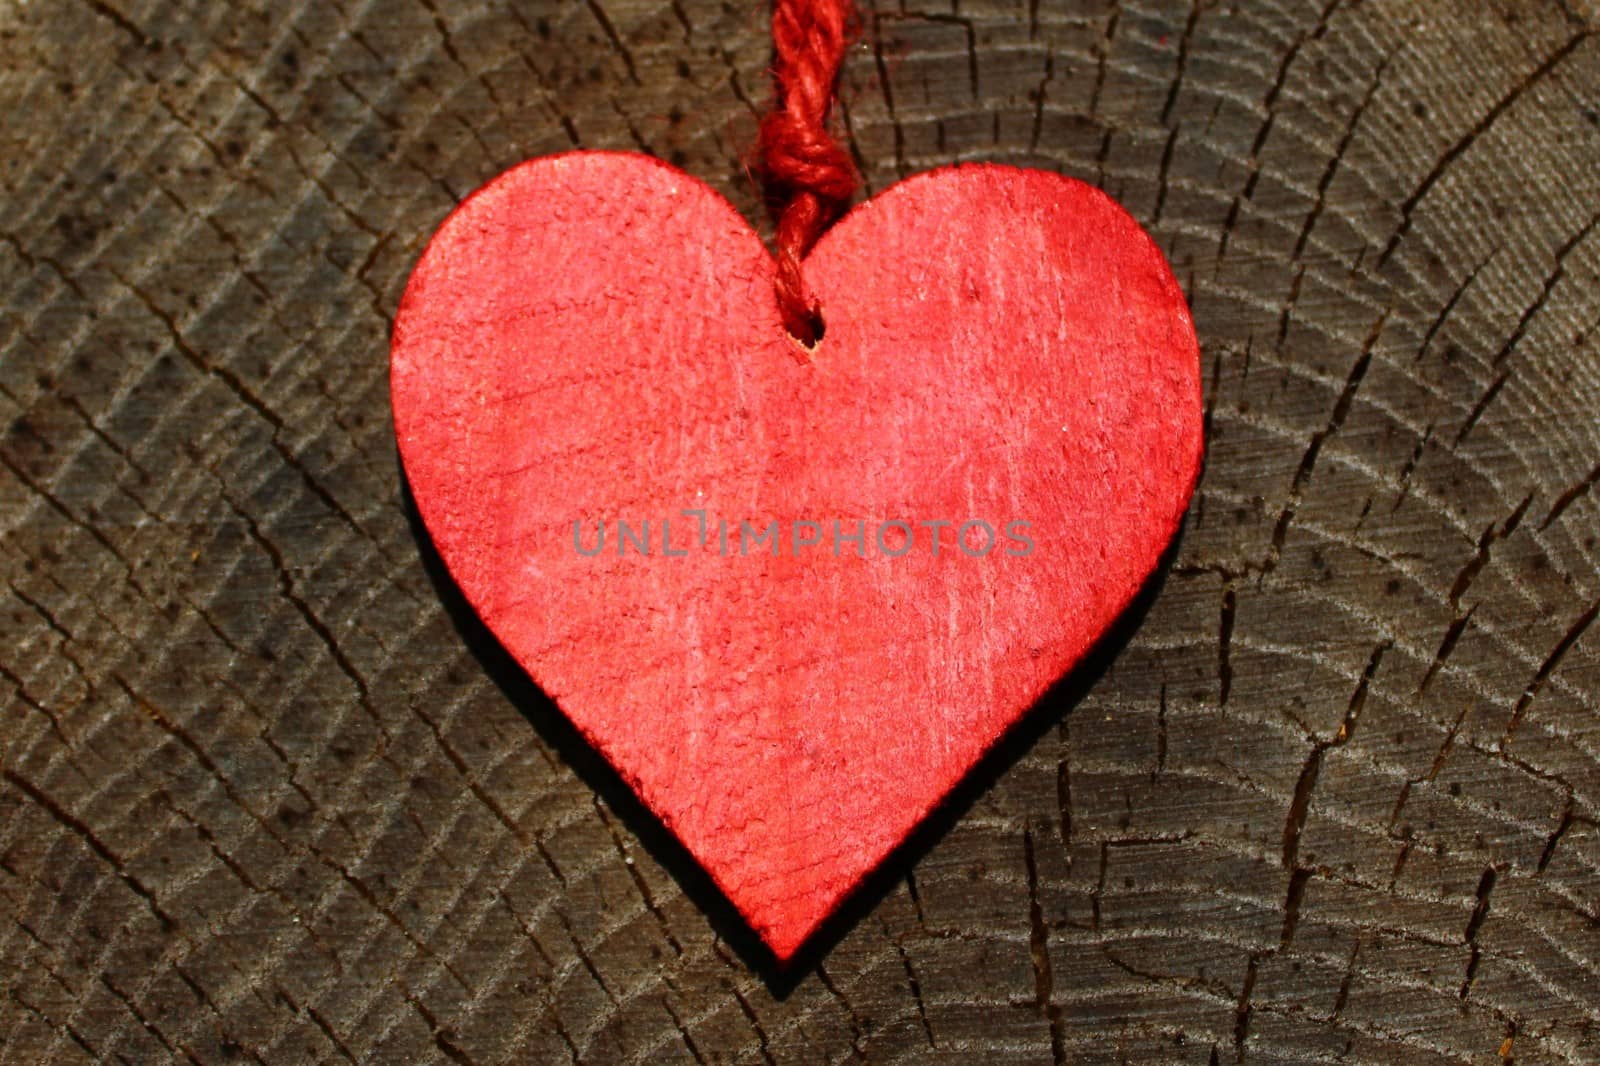 The picture shows a red heart on a tree.